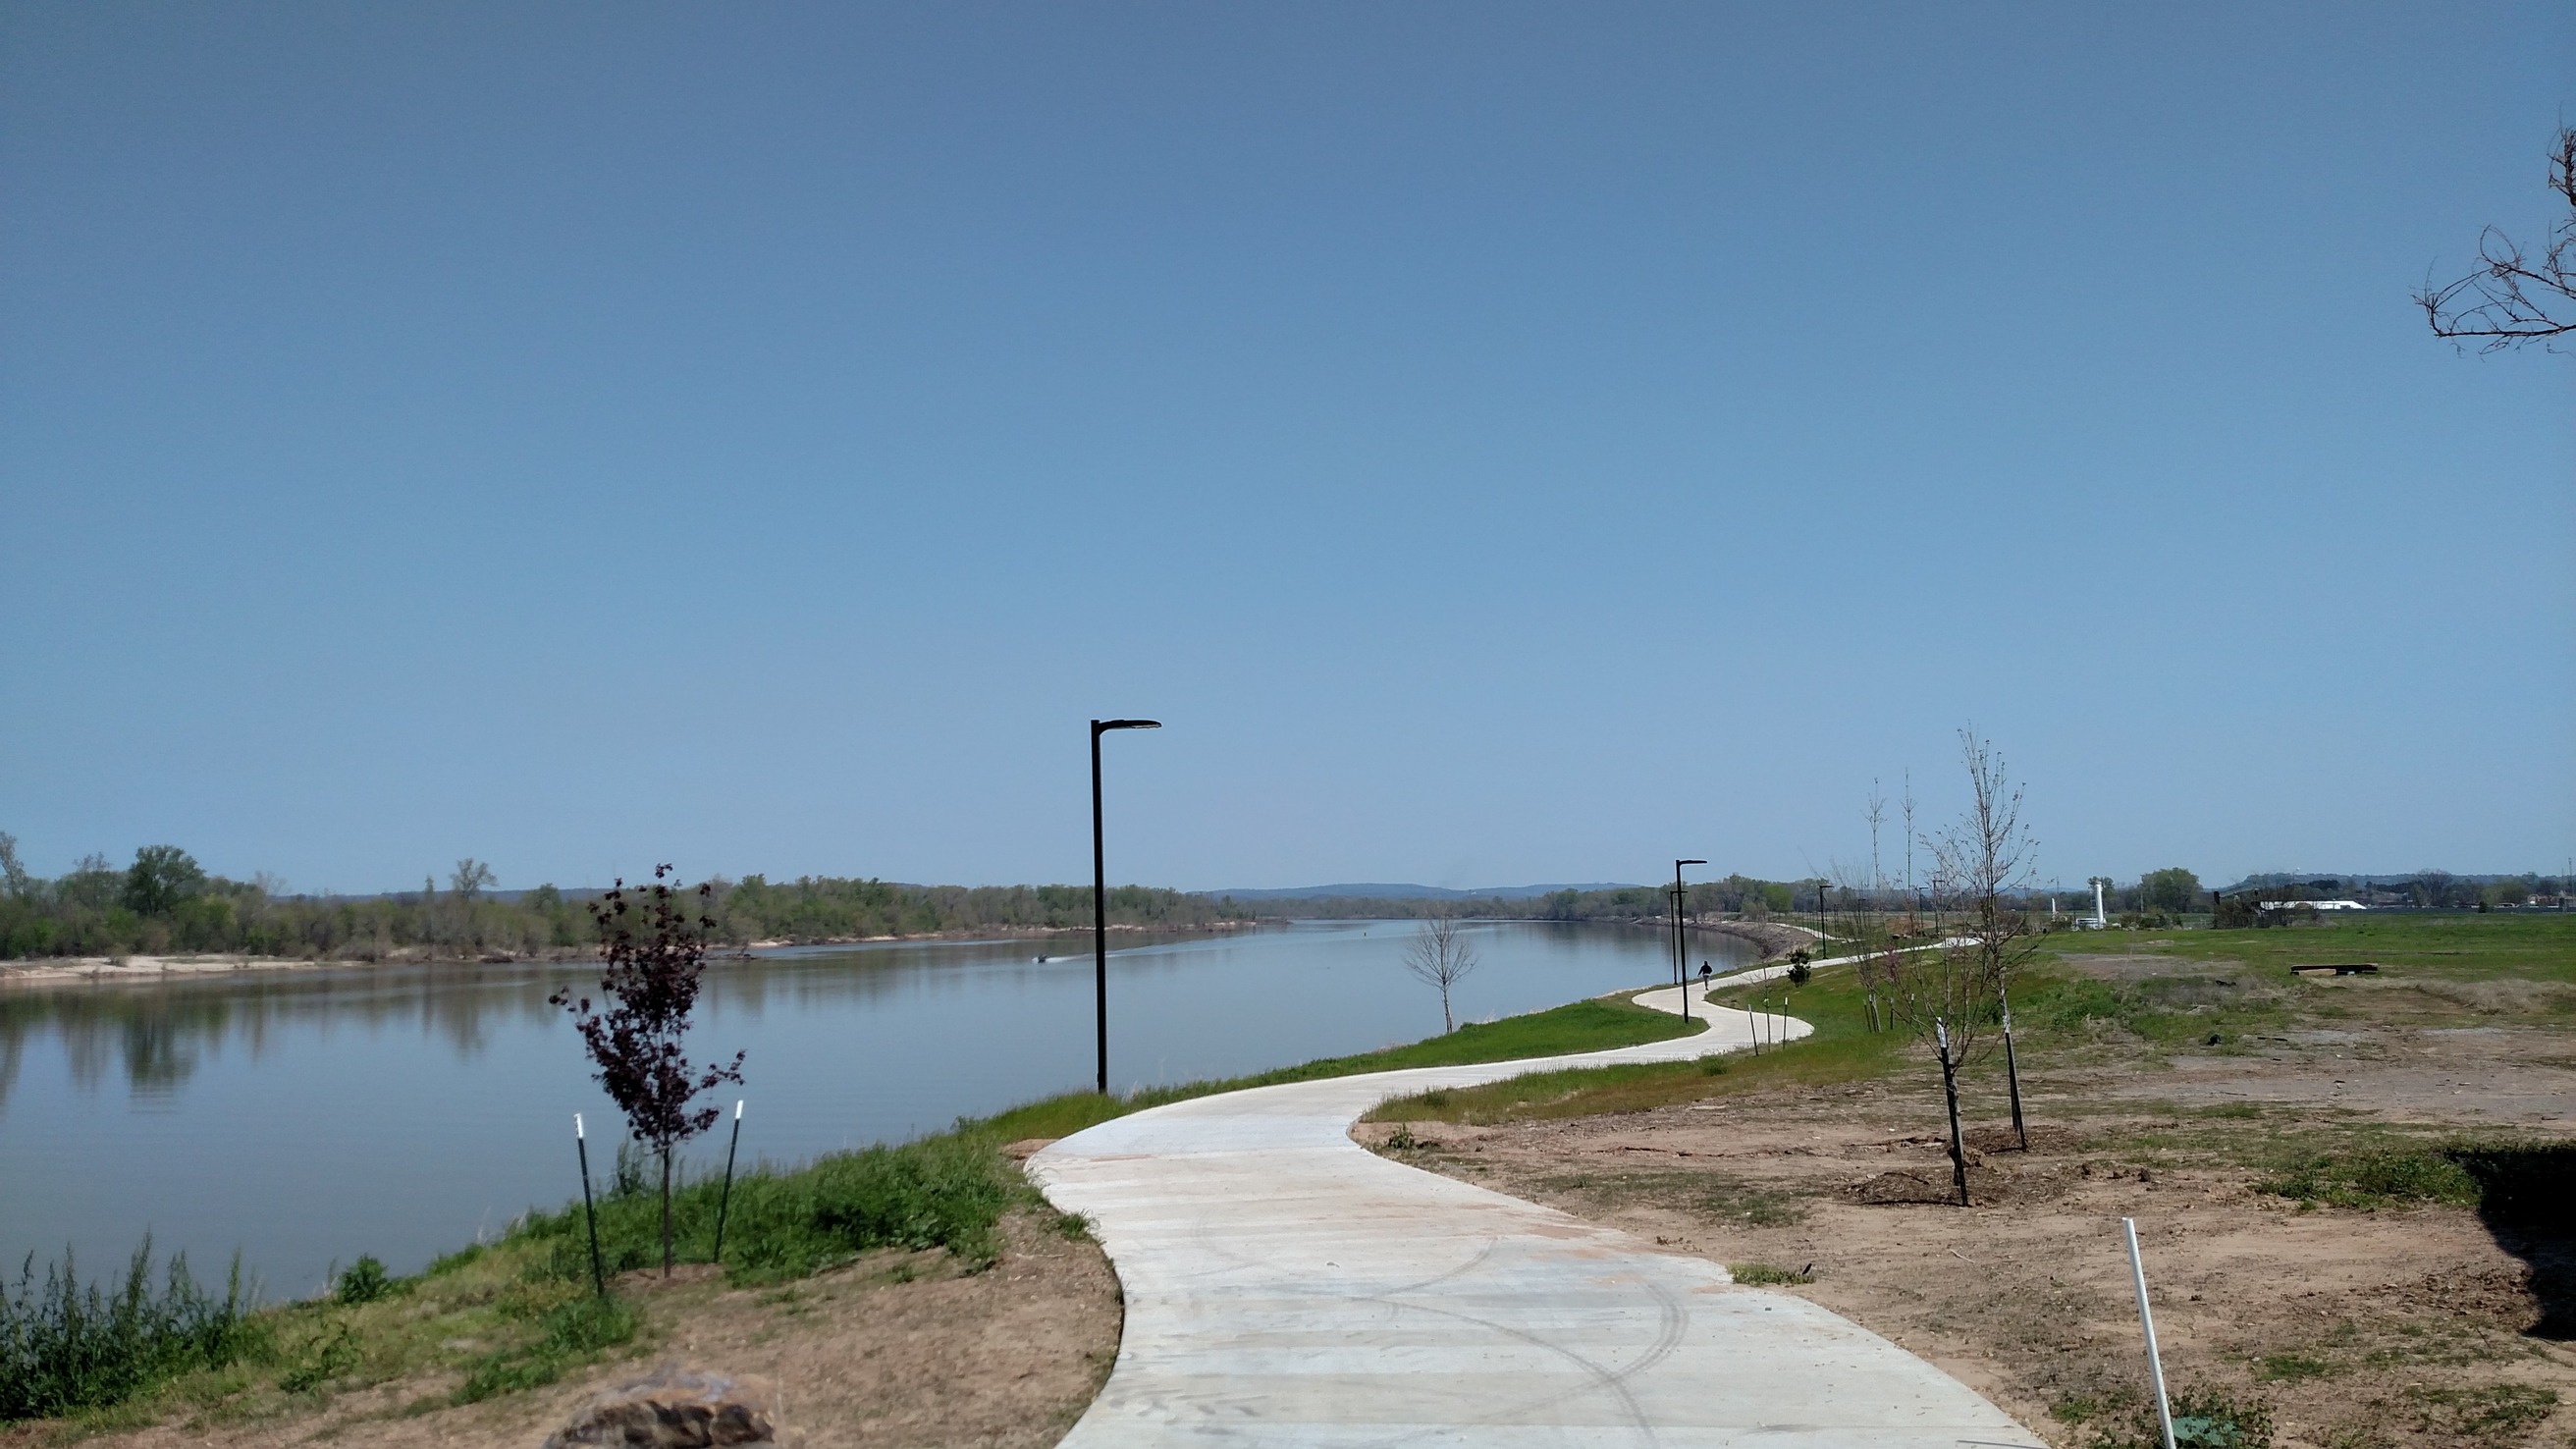 The River Trail runs along the Arkansas River at the Fort Smith National Historic Site in Fort Smith, Arkansas